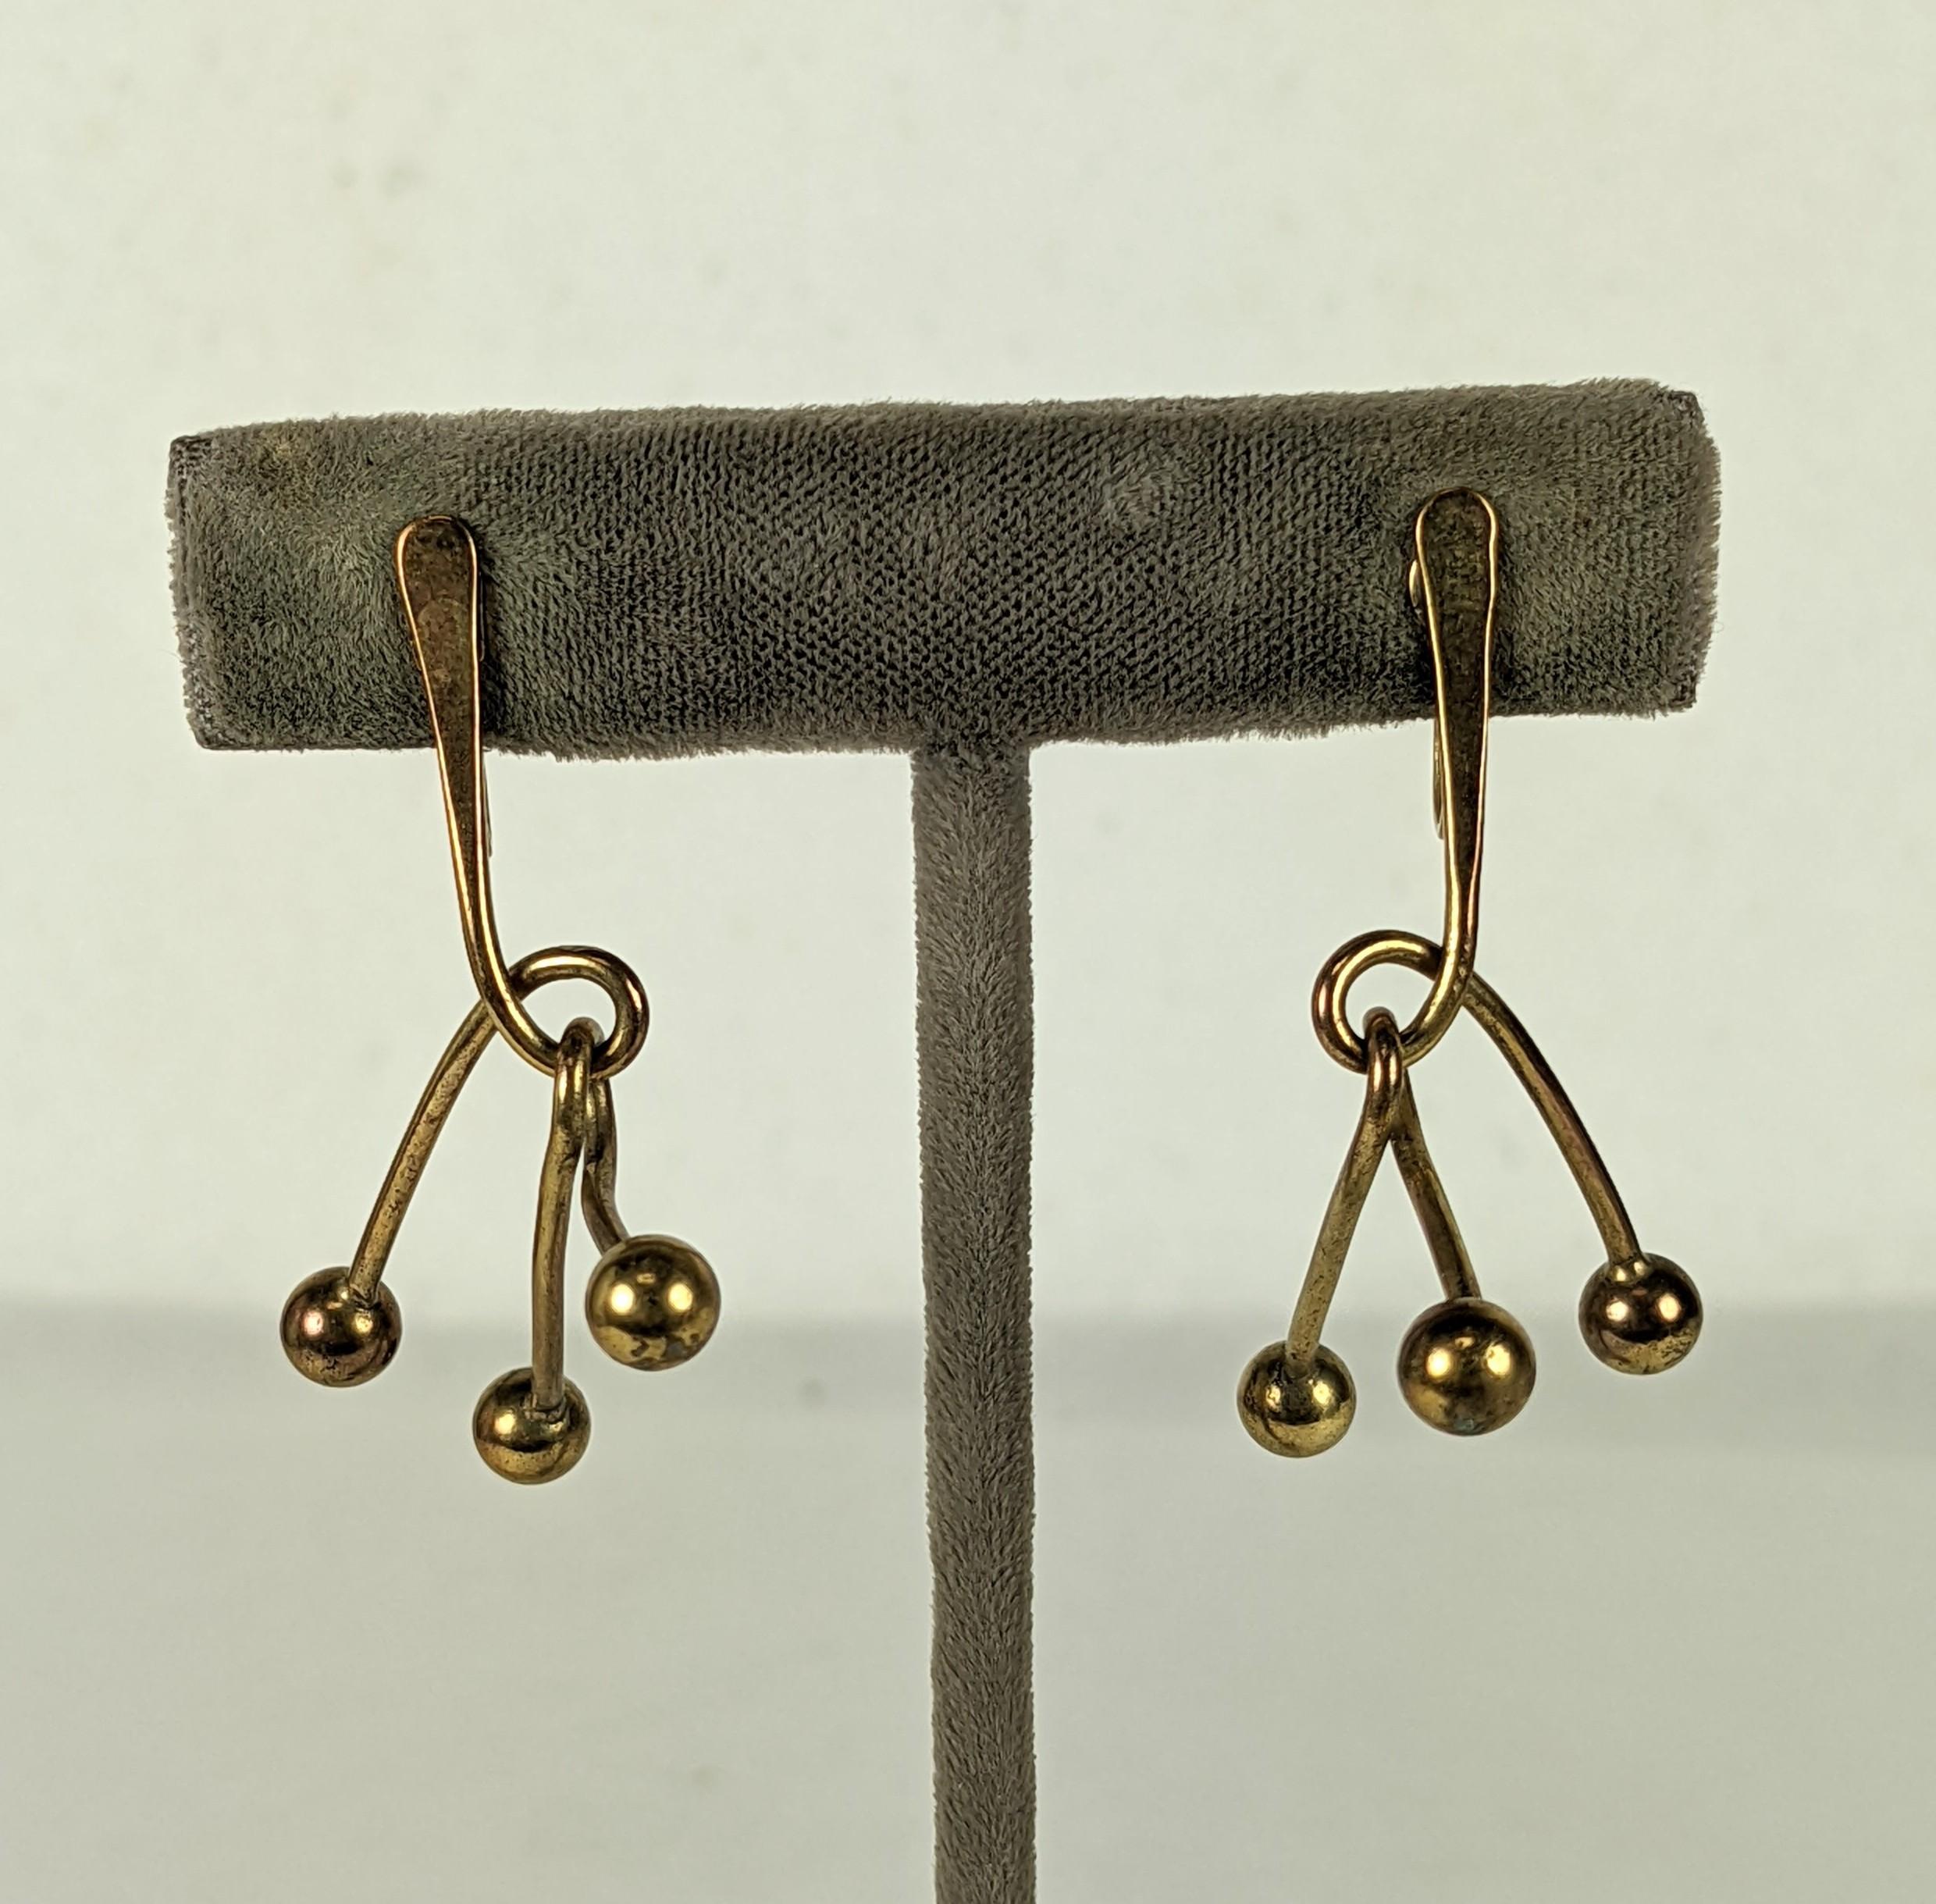 Art Smith Modernist Mobile Earrings in brass from the 1950's. Athough unsigned, this is a well recognized design of his (see Brooklyn Museum Collection) and the metal earring fixtures are correct as well. Designed as Art for your face, these mini